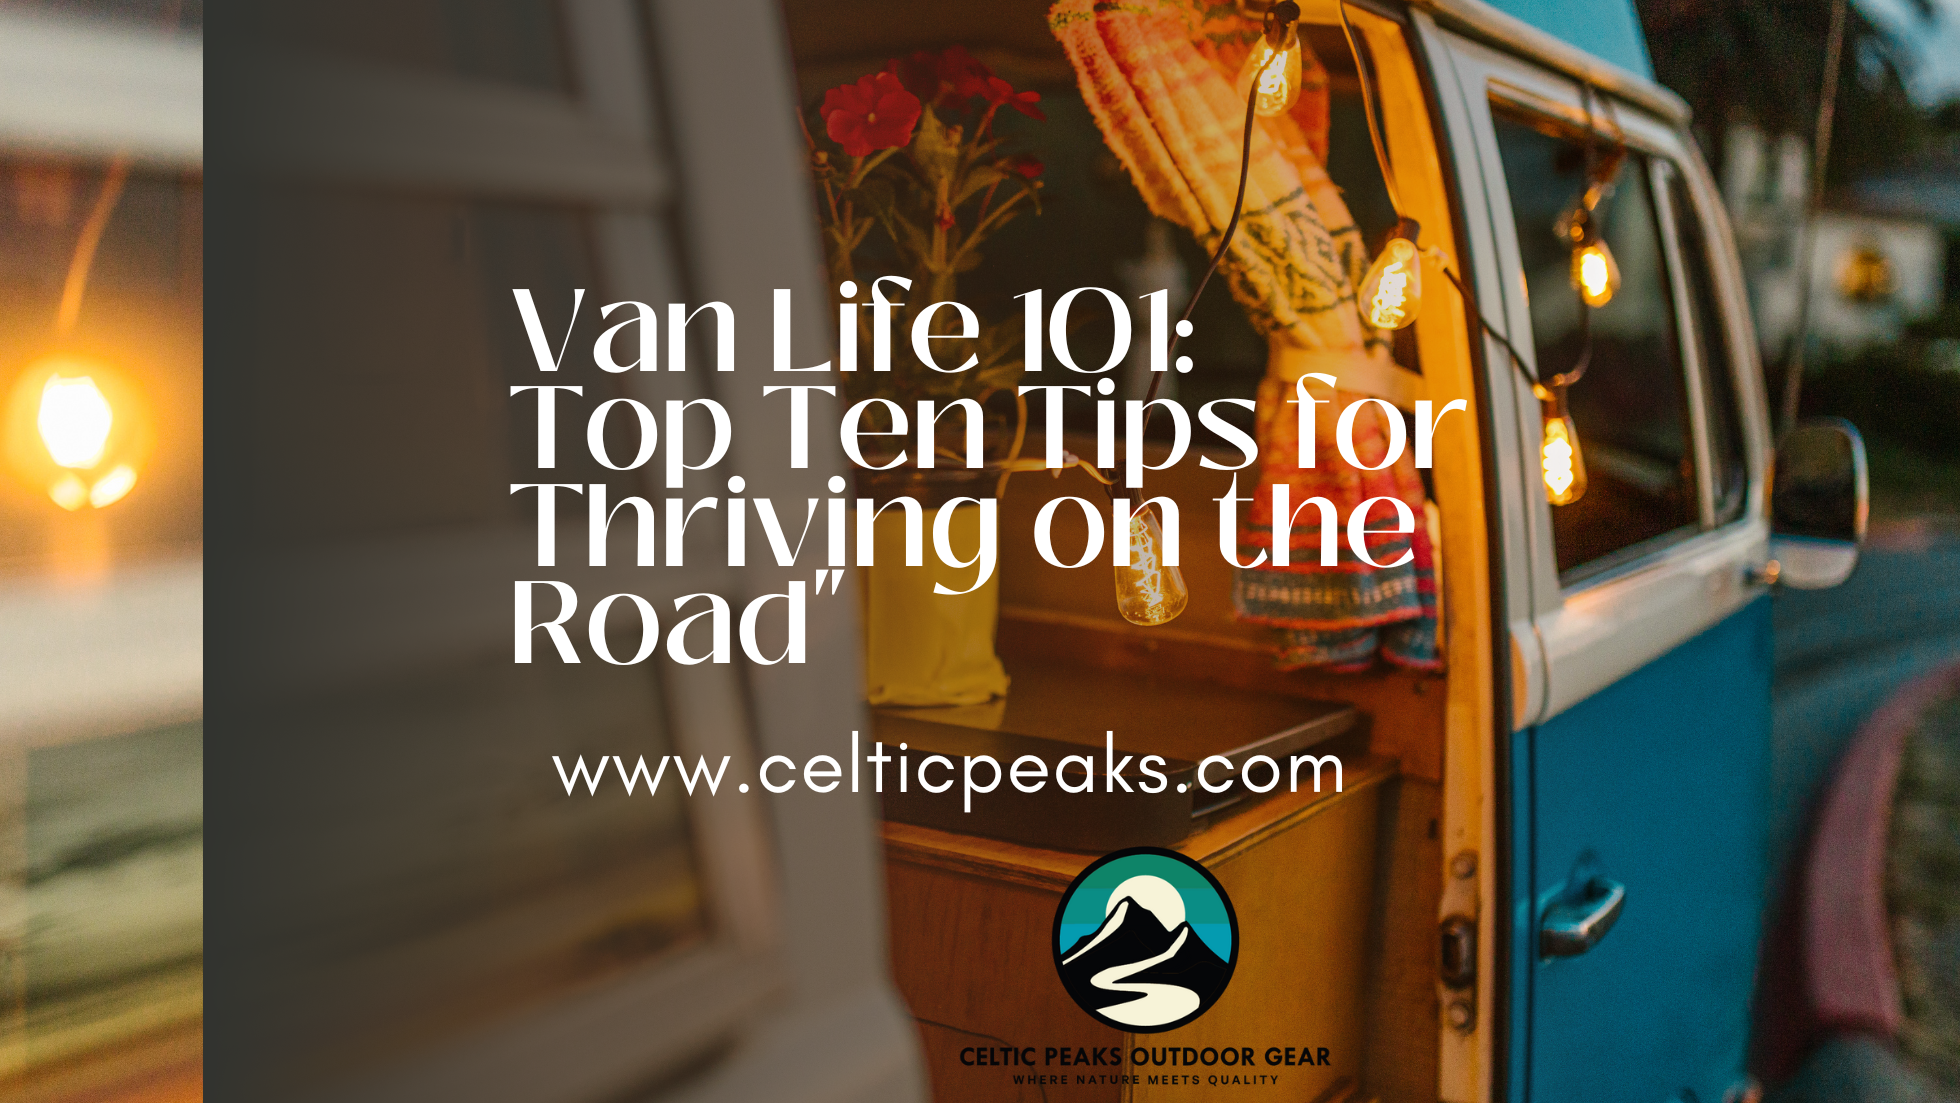 "Van Life 101: Top Ten Tips for Thriving on the Road"